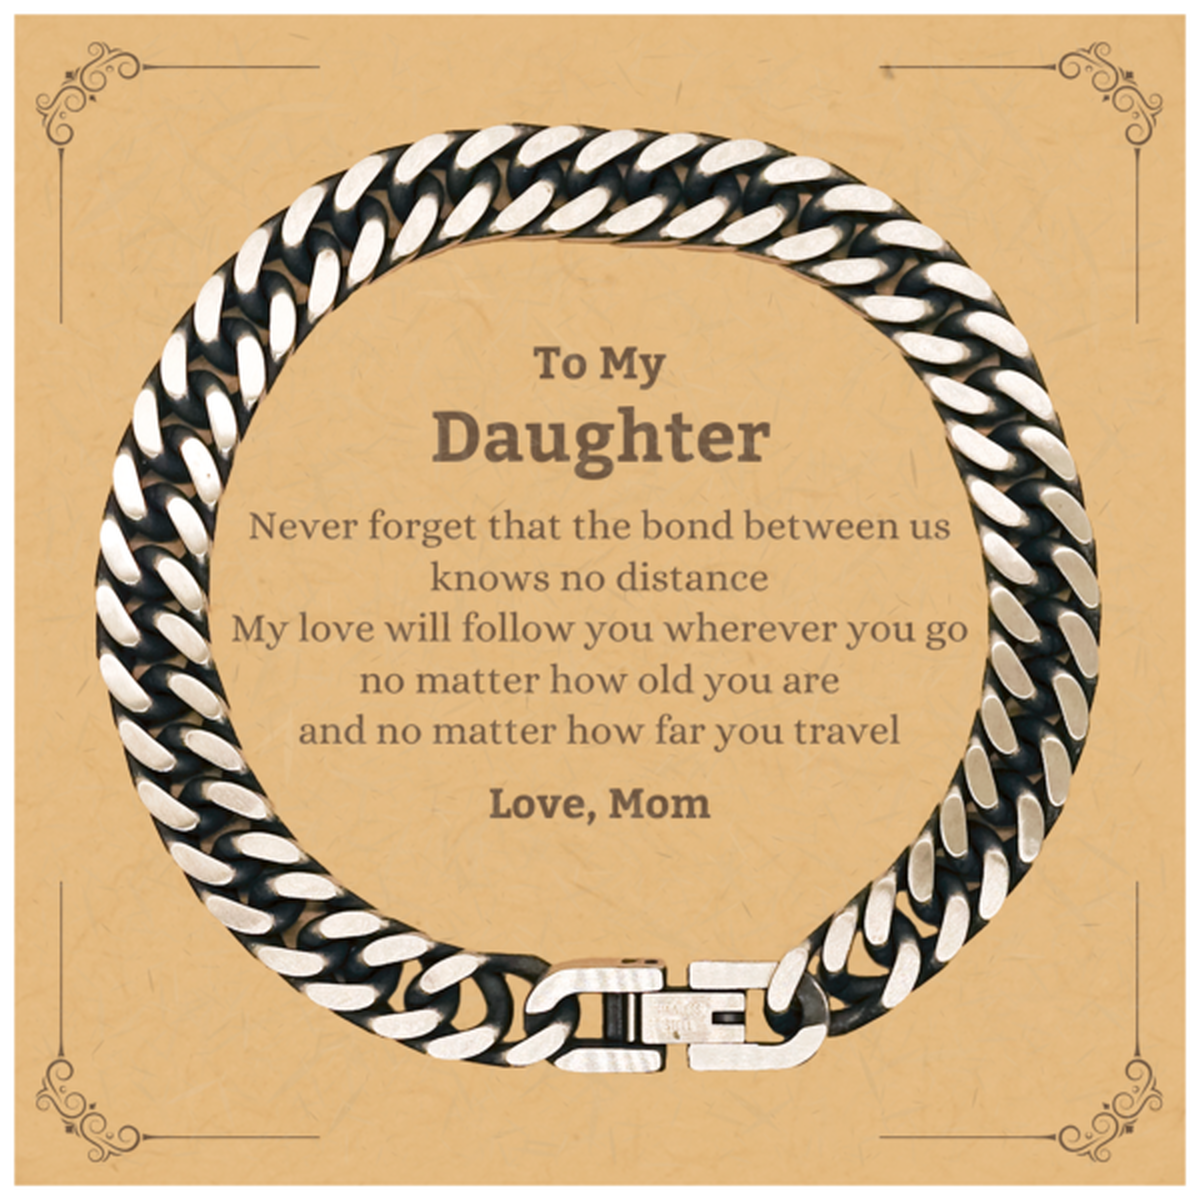 Daughter Birthday Gifts from Mom, Adjustable Cuban Link Chain Bracelet for Daughter Christmas Graduation Unique Gifts Daughter Never forget that the bond between us knows no distance. Love, Mom